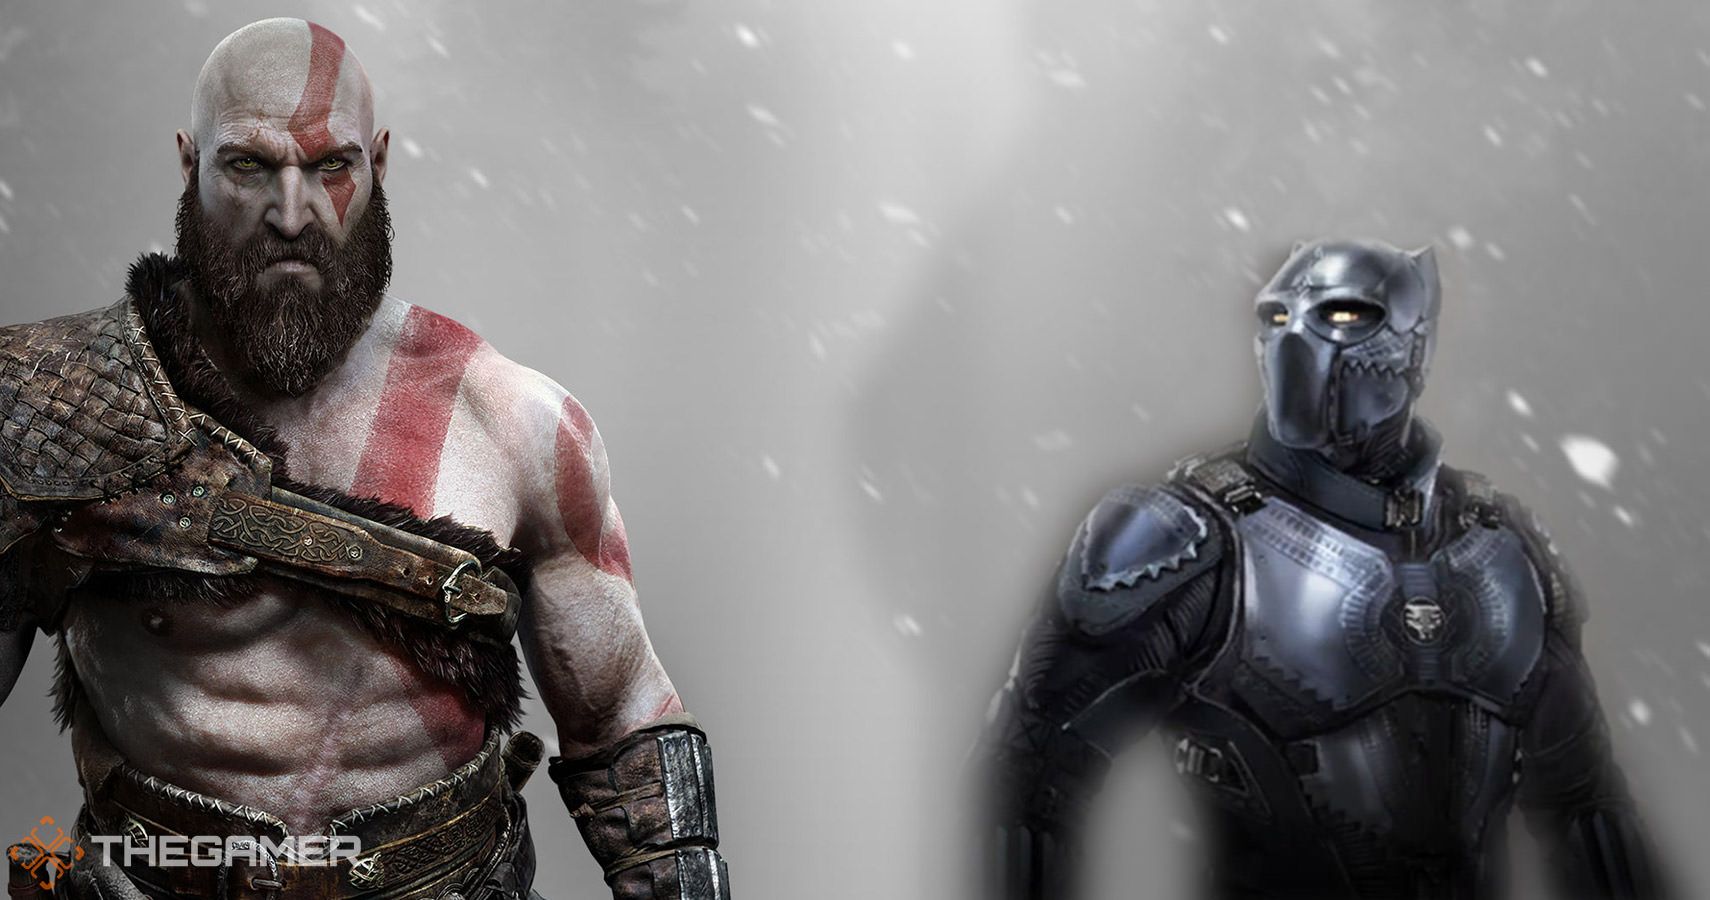 who voices kratos in god of war 4